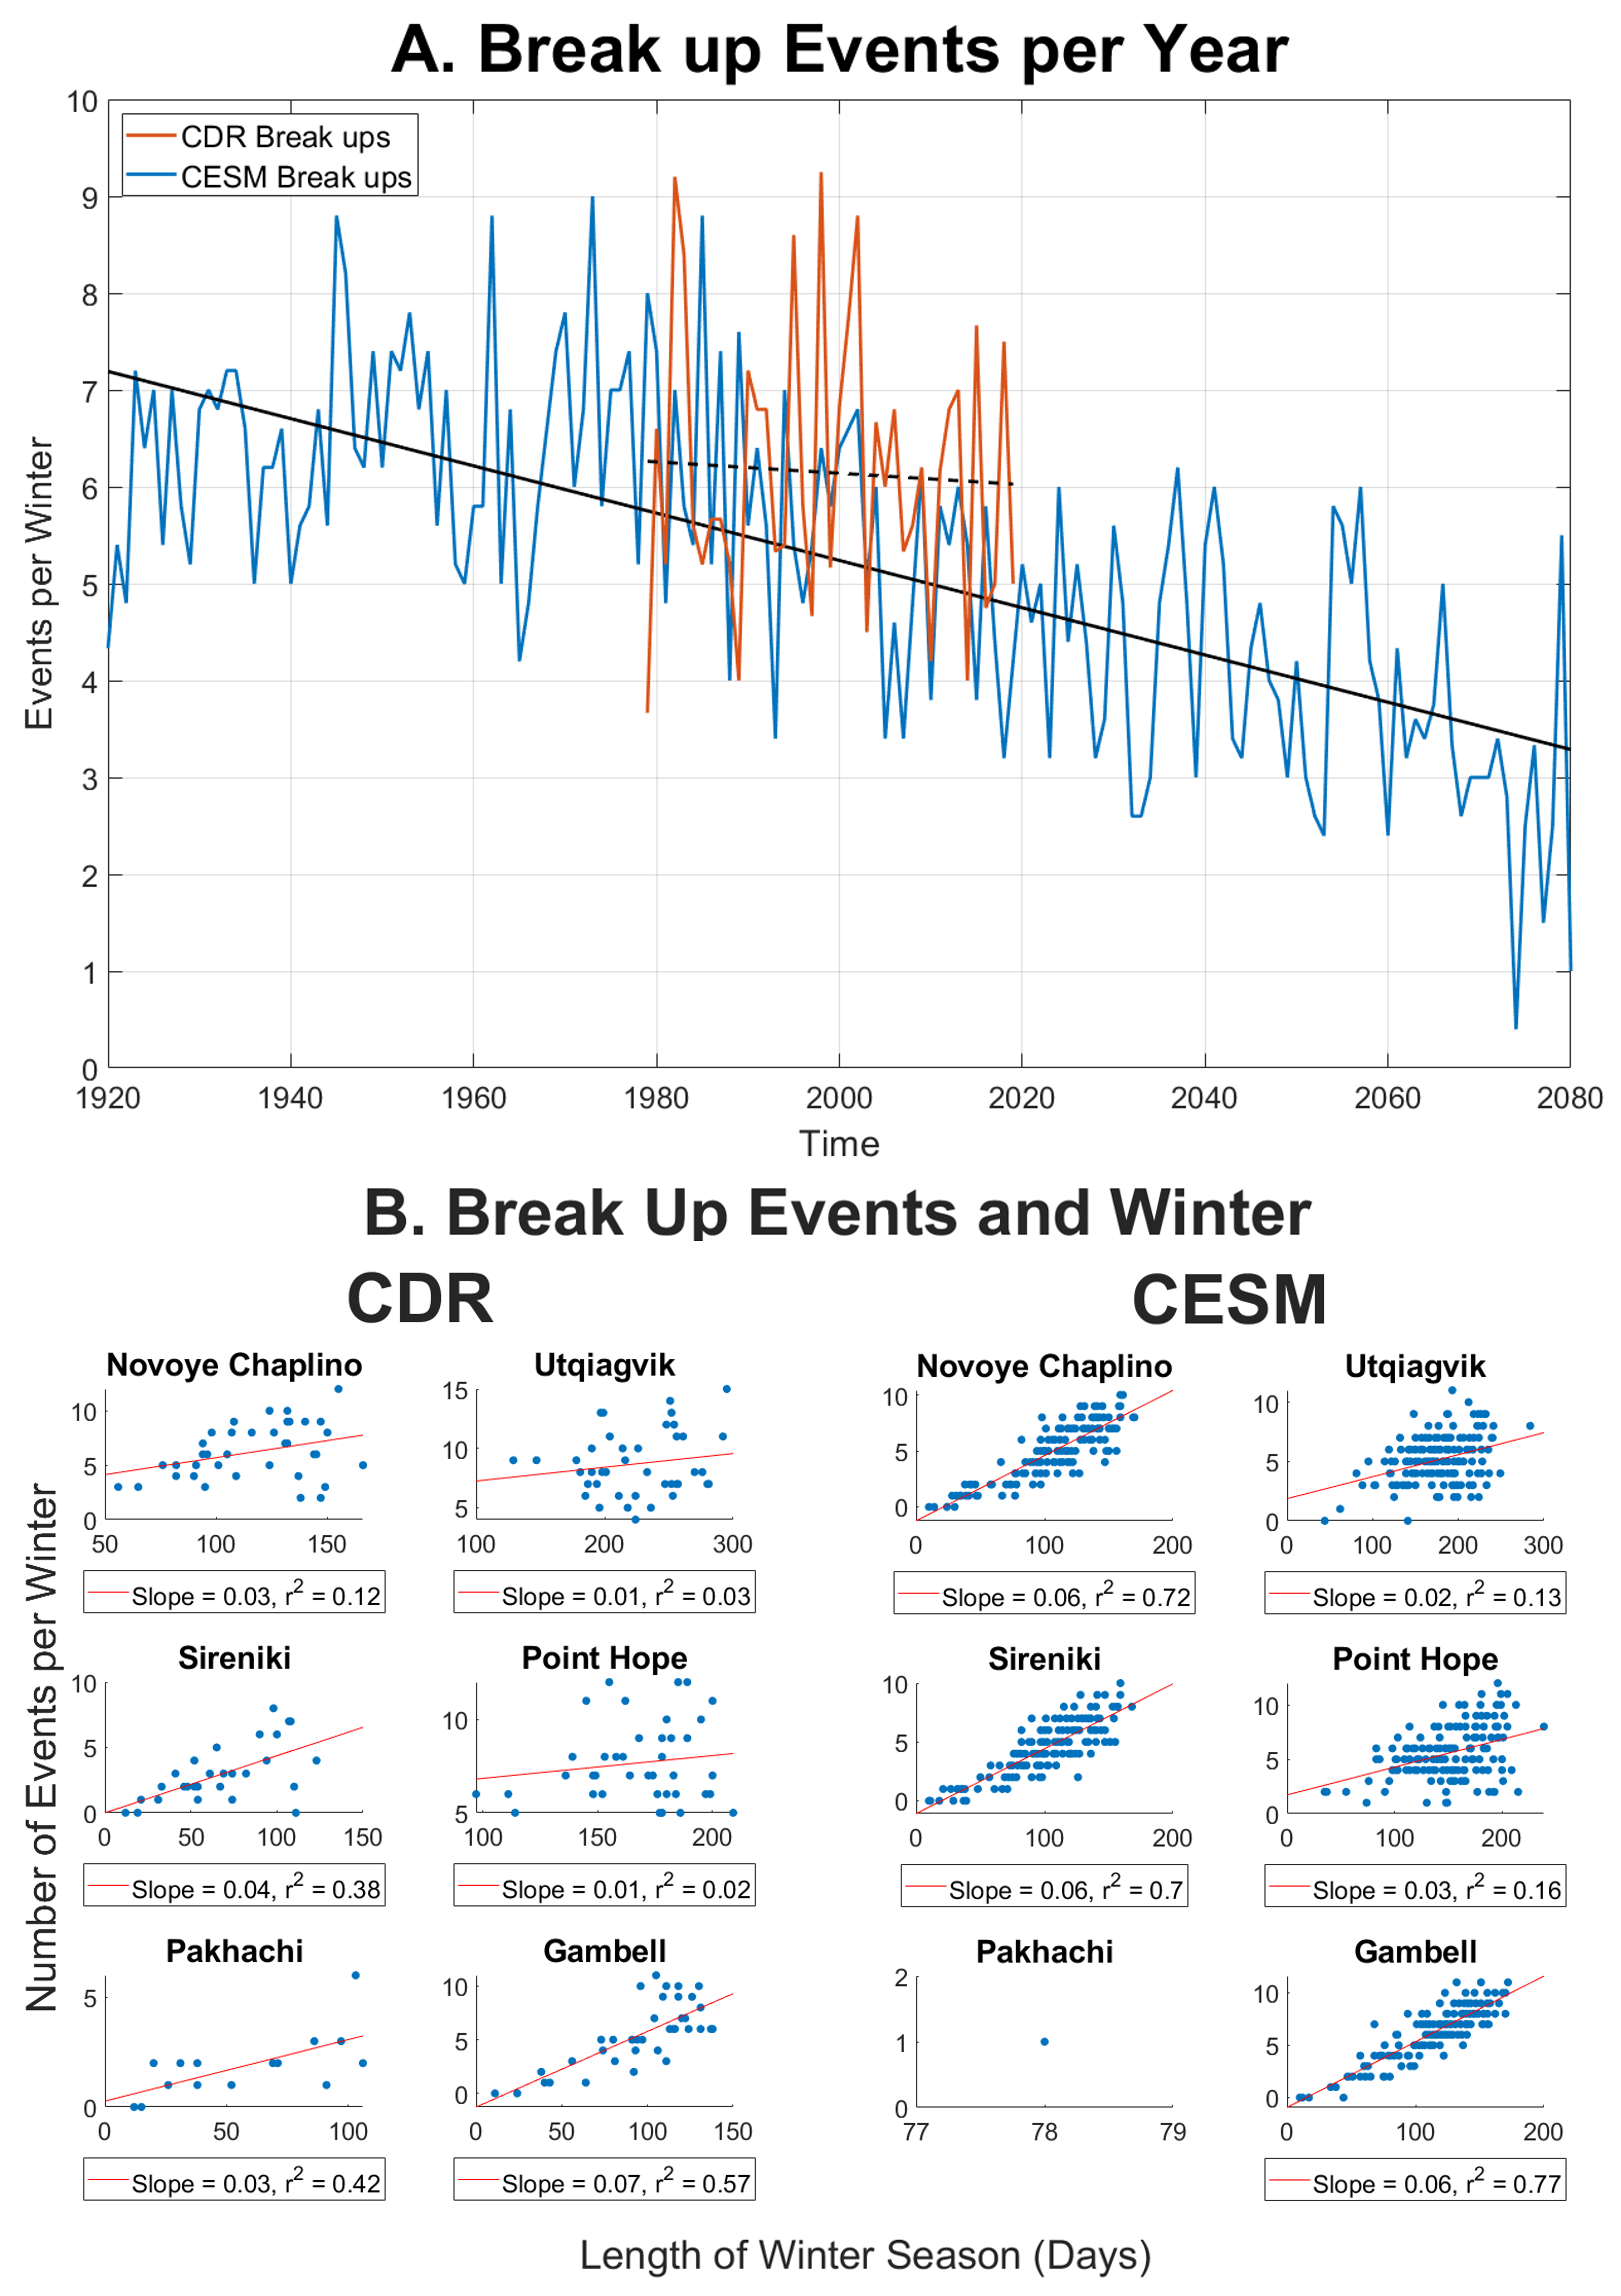 Figure 5. A. Mean Number of break‐up events per year for the 6 considered locations identified from CDR (solid orange line) and CESM1‐LE (solid blue line) with their linear regressions (black dotted and solid lines respectively). B. Scatter plot between the length of the winter season (days) and number of events (blue dots) with linear regressions (red lines). Pakhachi shows only one break‐up event, and therefore a correlation is not possible. Model component is from ensemble member 2 of the CESM1‐LE.